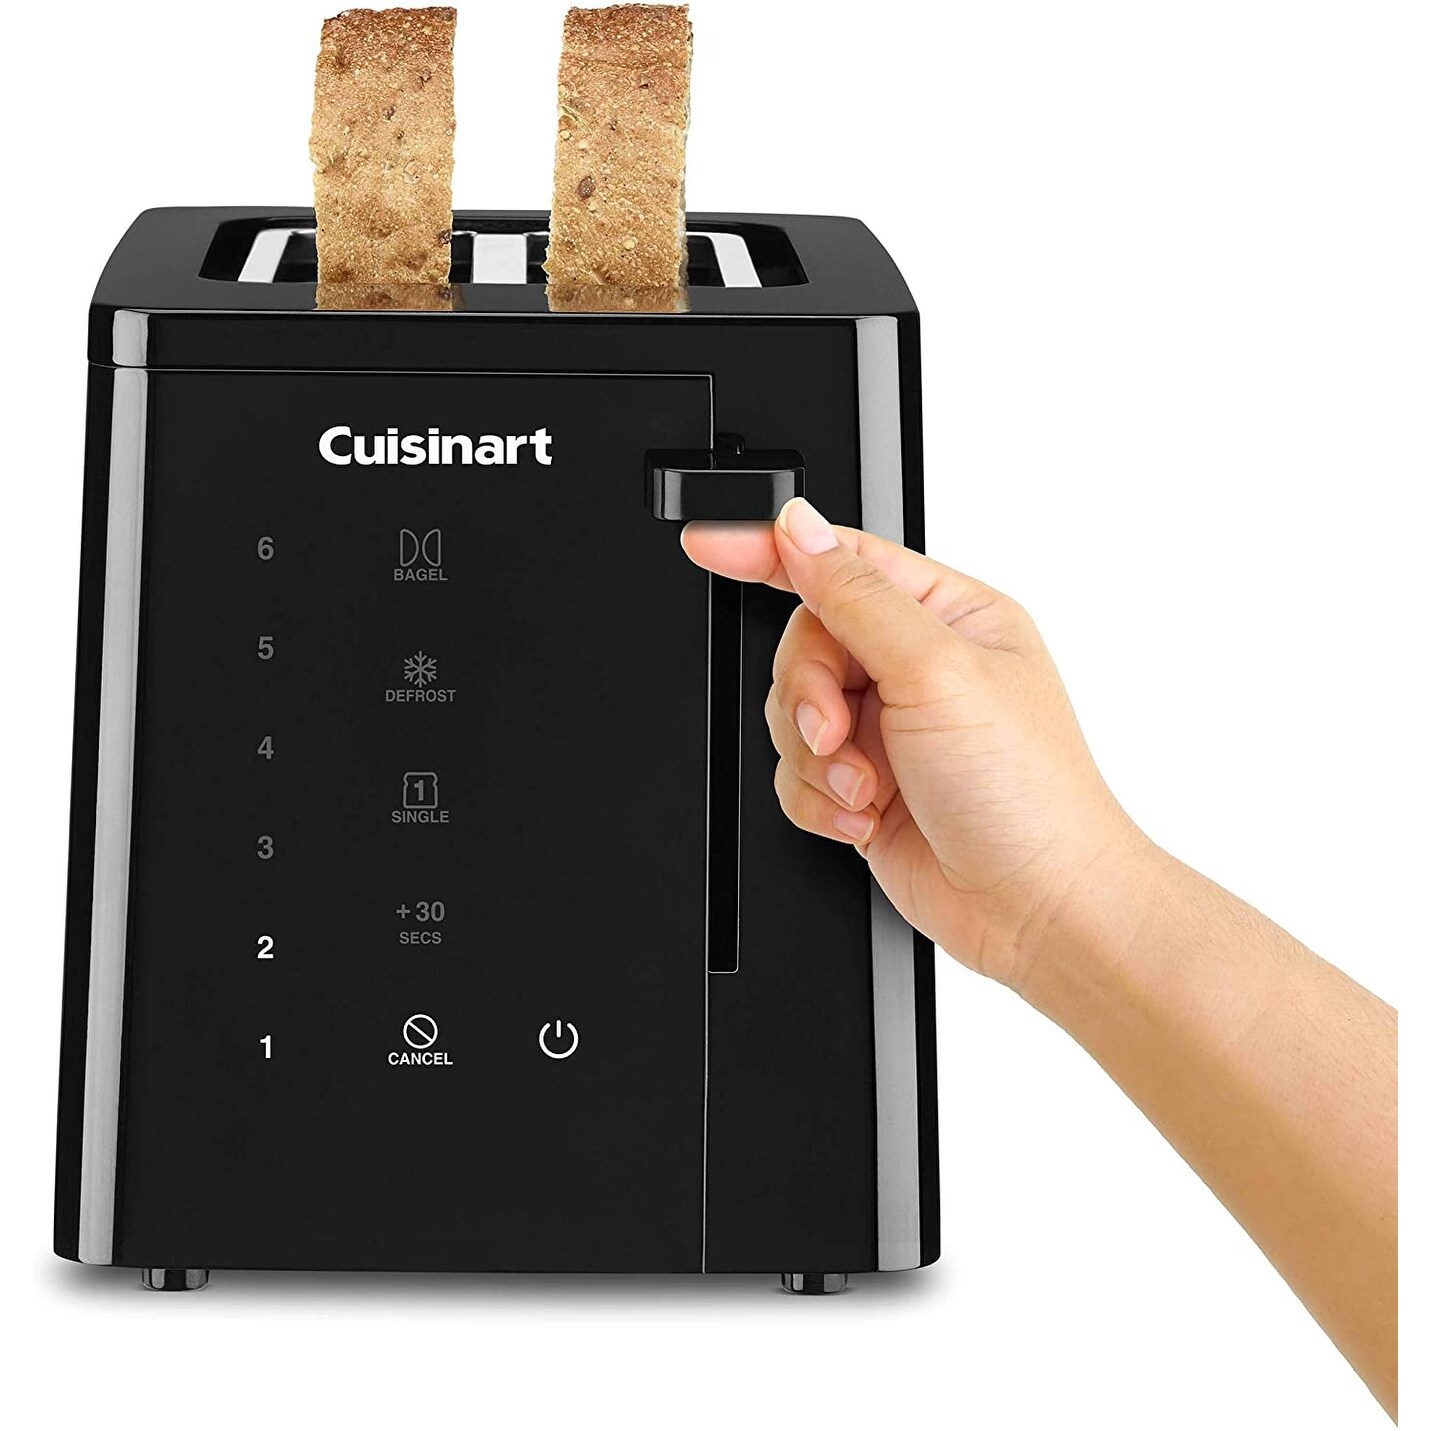 Cuisinart CPT-T20 Touchscreen, 2-Slice Toaster, Black - 6.5 x 10.35 x 7.2 inches